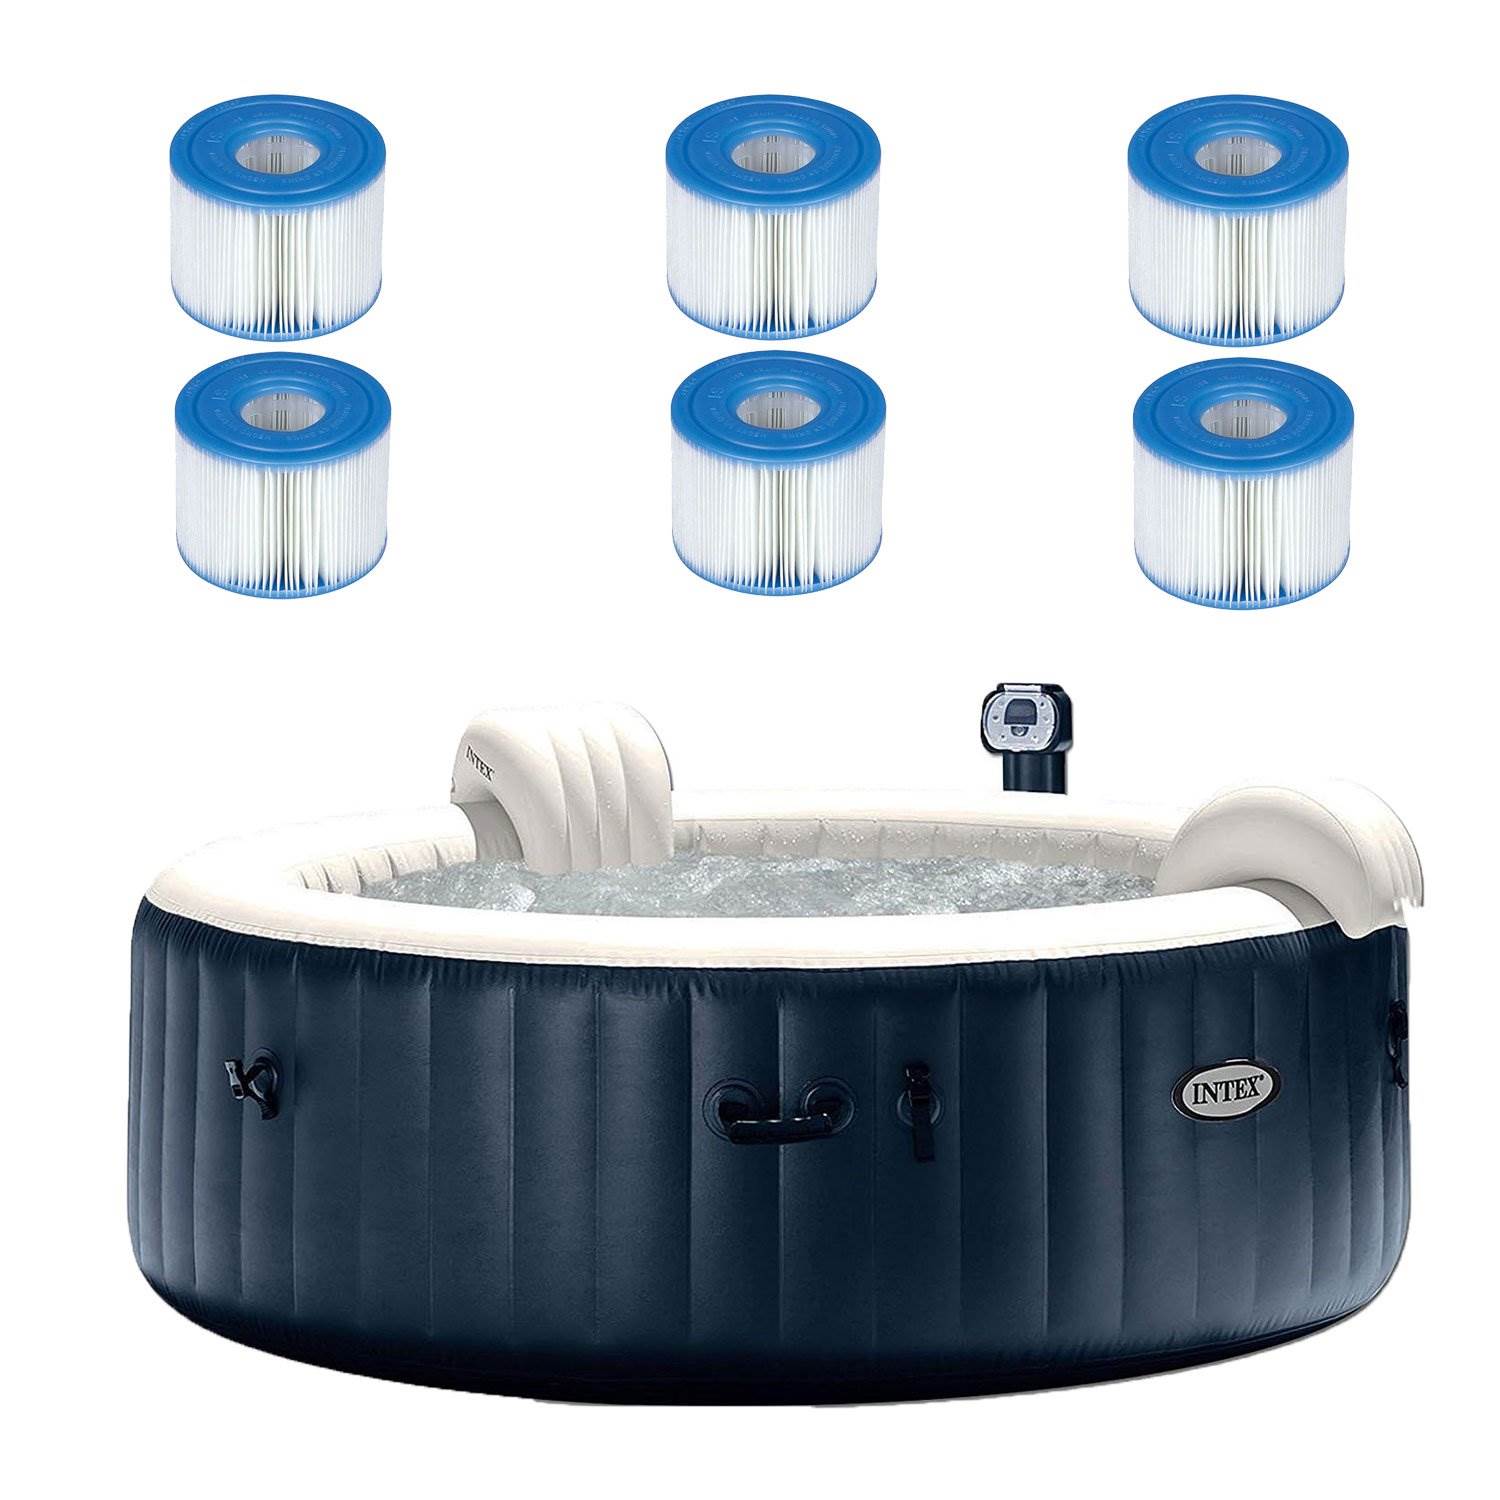 Intex Pure Spa 6 Person Inflatable Hot Tub With 6 Filters 78257319961 Ebay